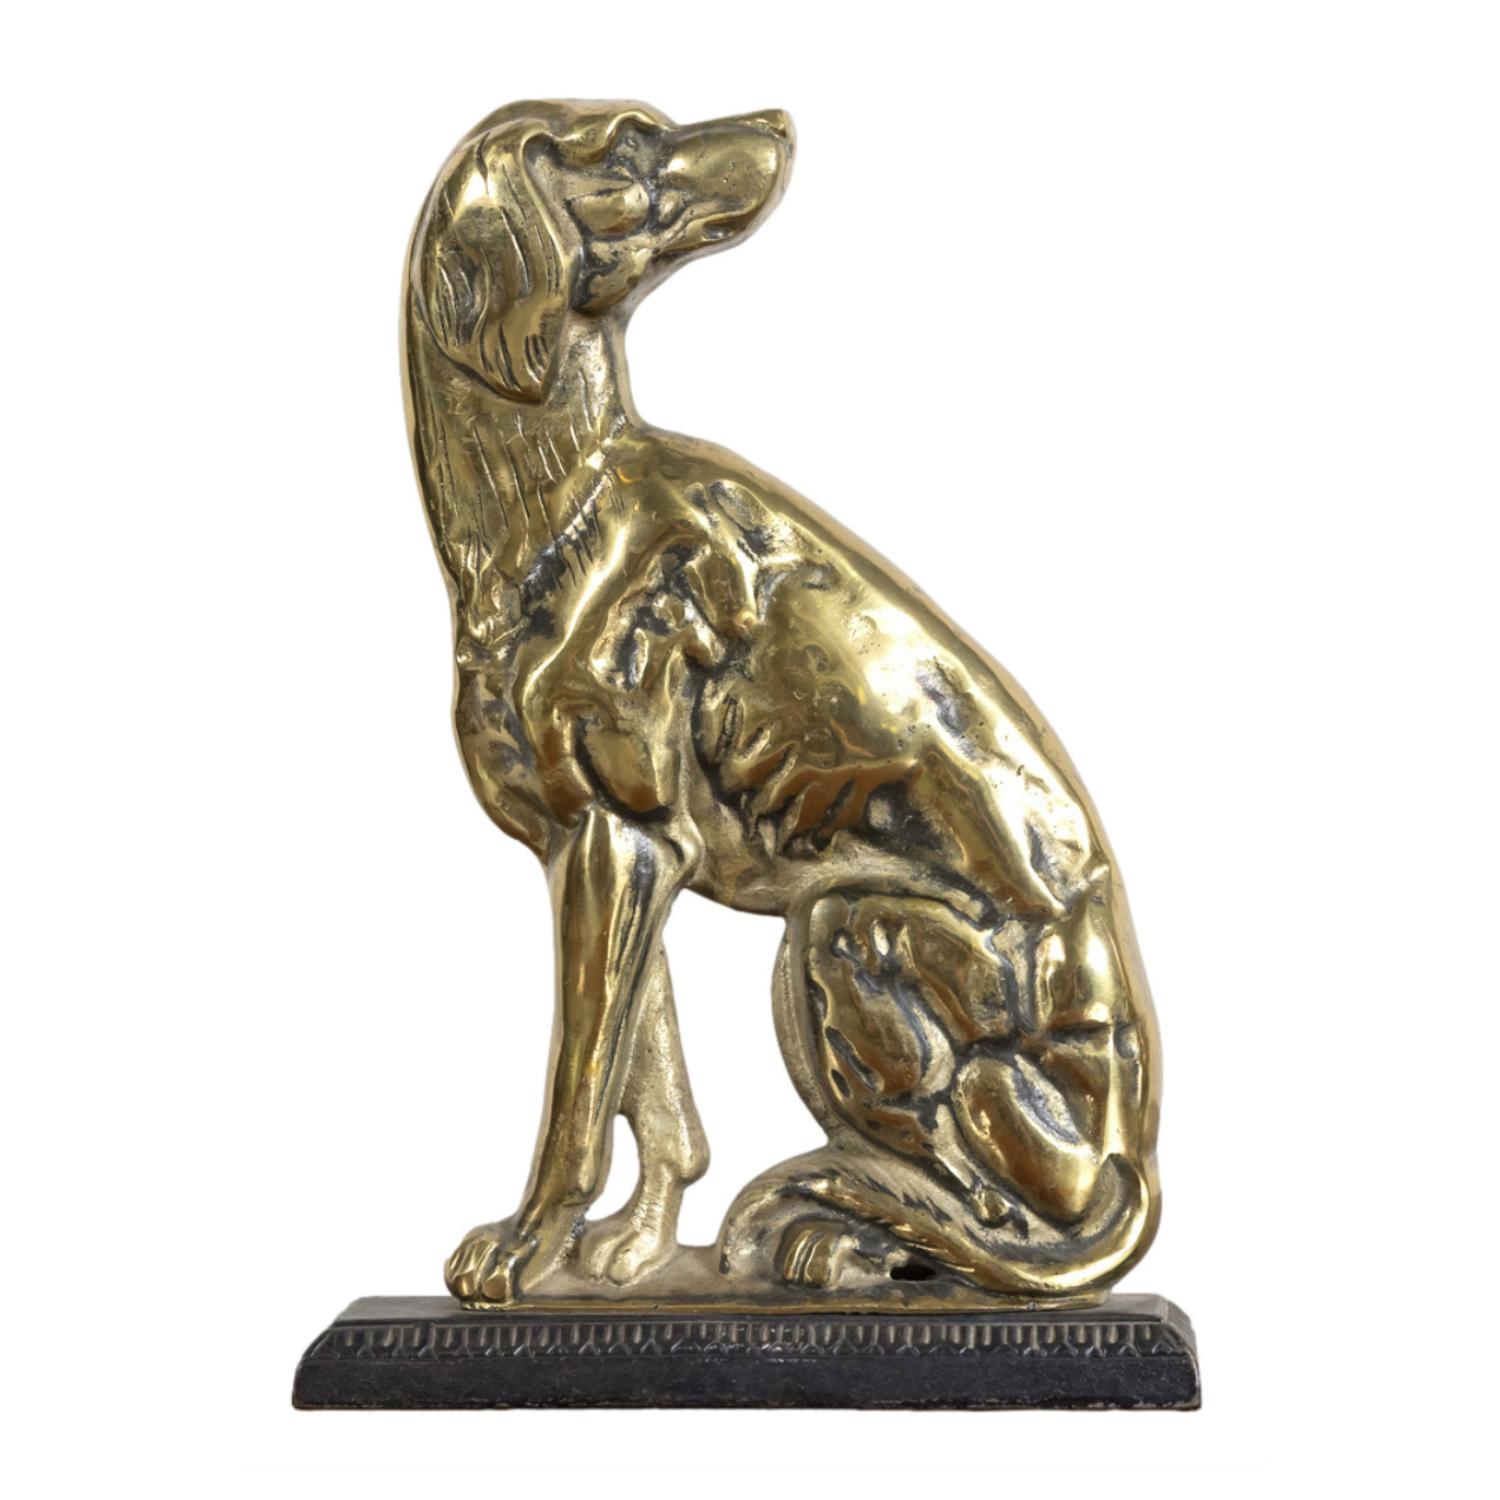 A superb pair of 19th century English antique brass doorstops, cast as hunting dogs or hounds and set upon iron plinth bases, circa 1870s. These fine decorative dog sculptures are a nice size and very well made with wonderful details. Would also be